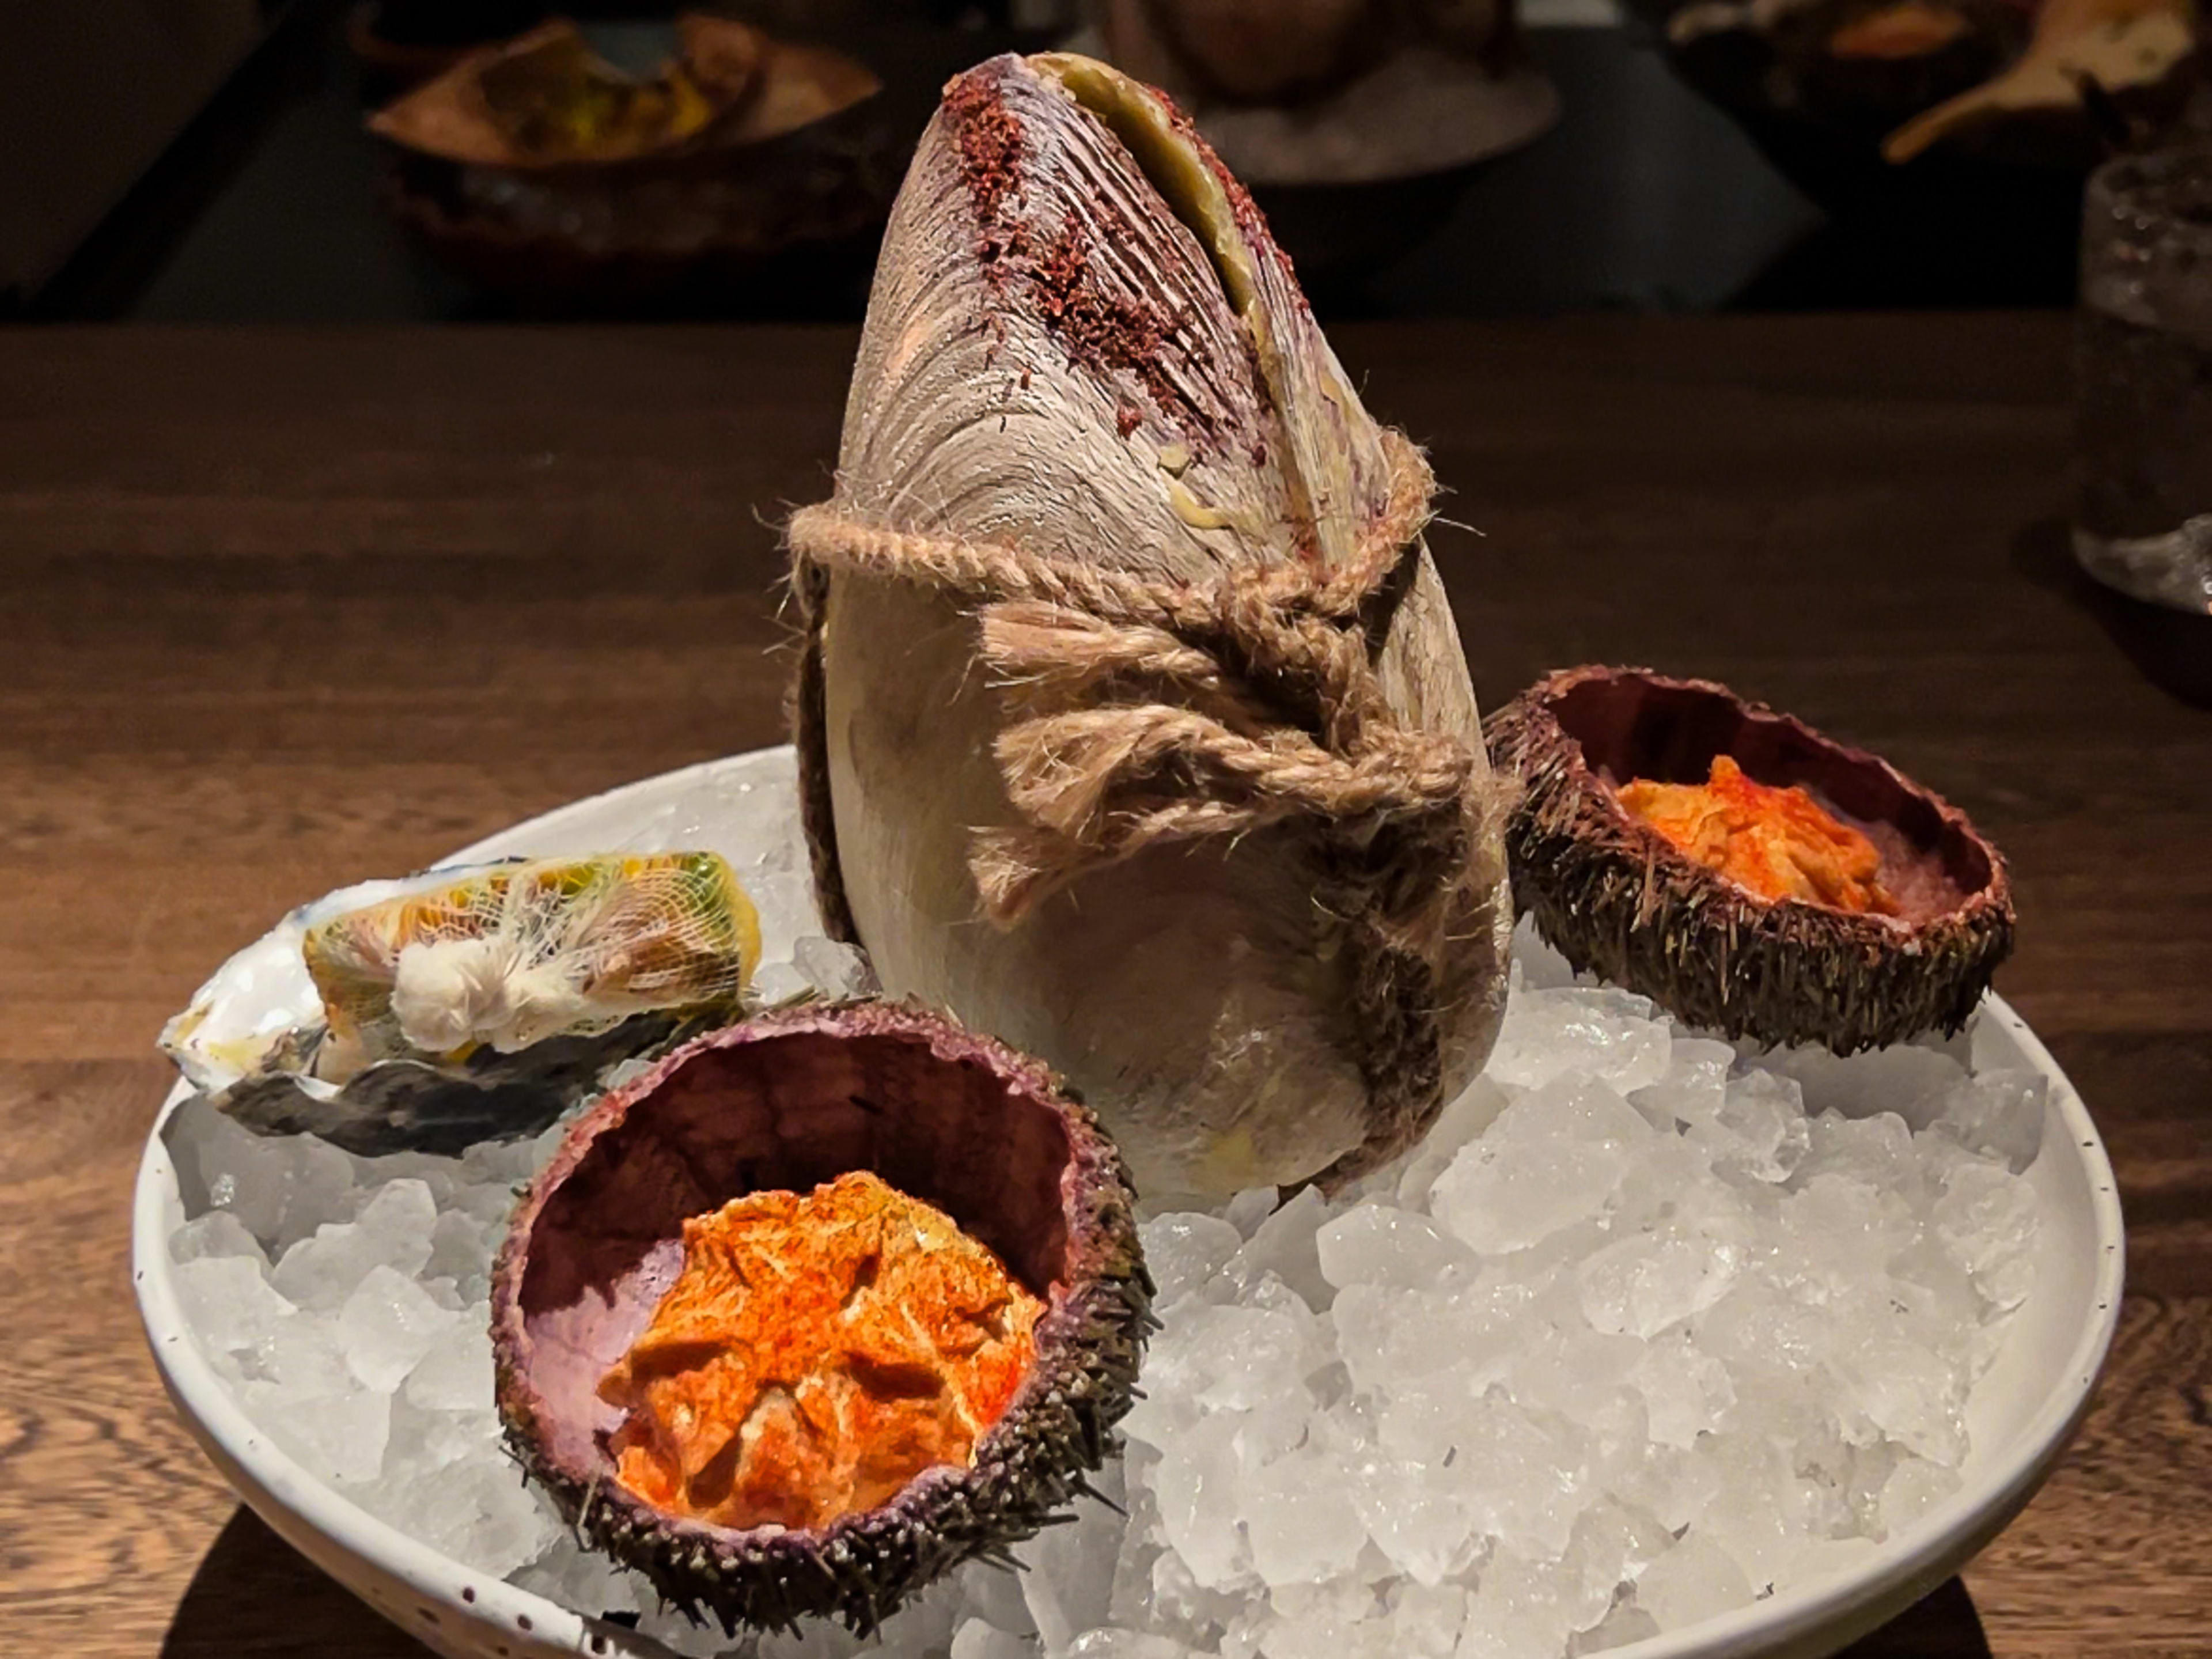 A large surf clam shell on a bowl of ice surrounded by uni.